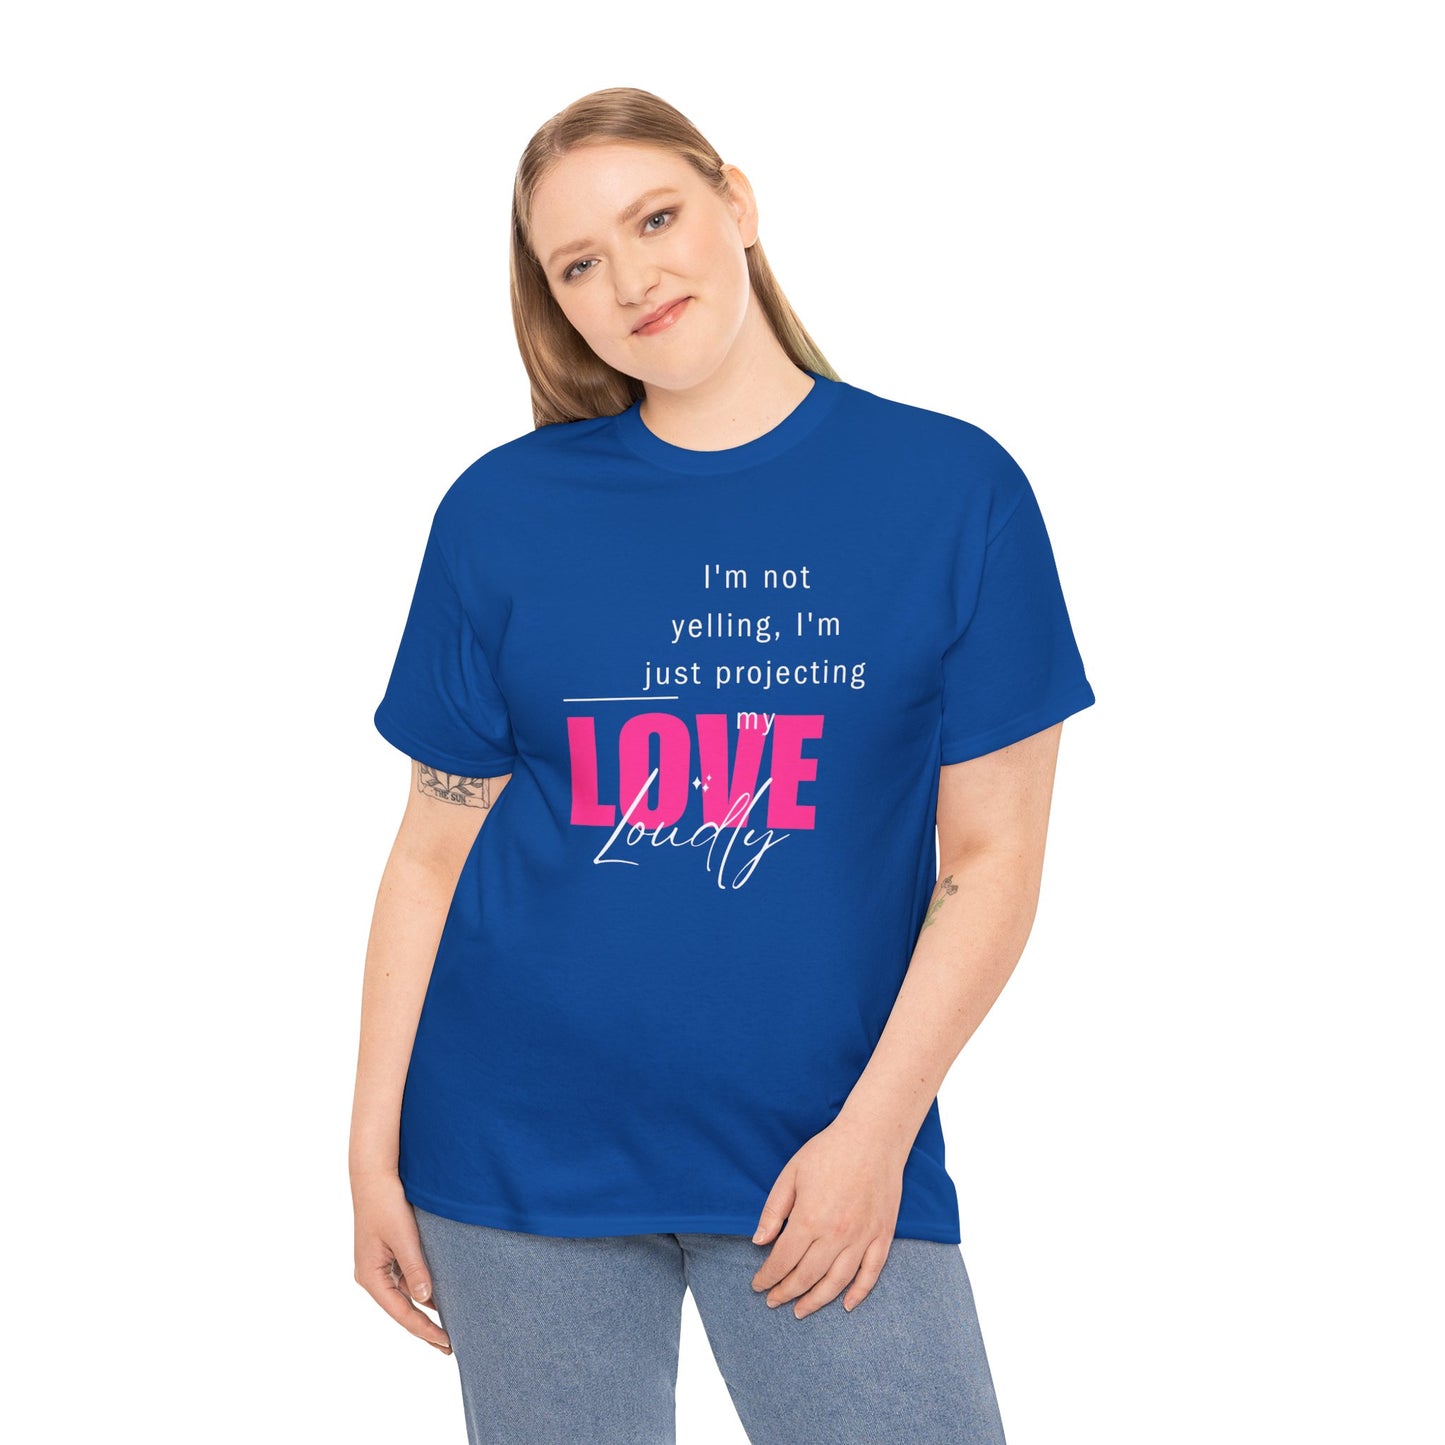 Yelling with love T-shirt